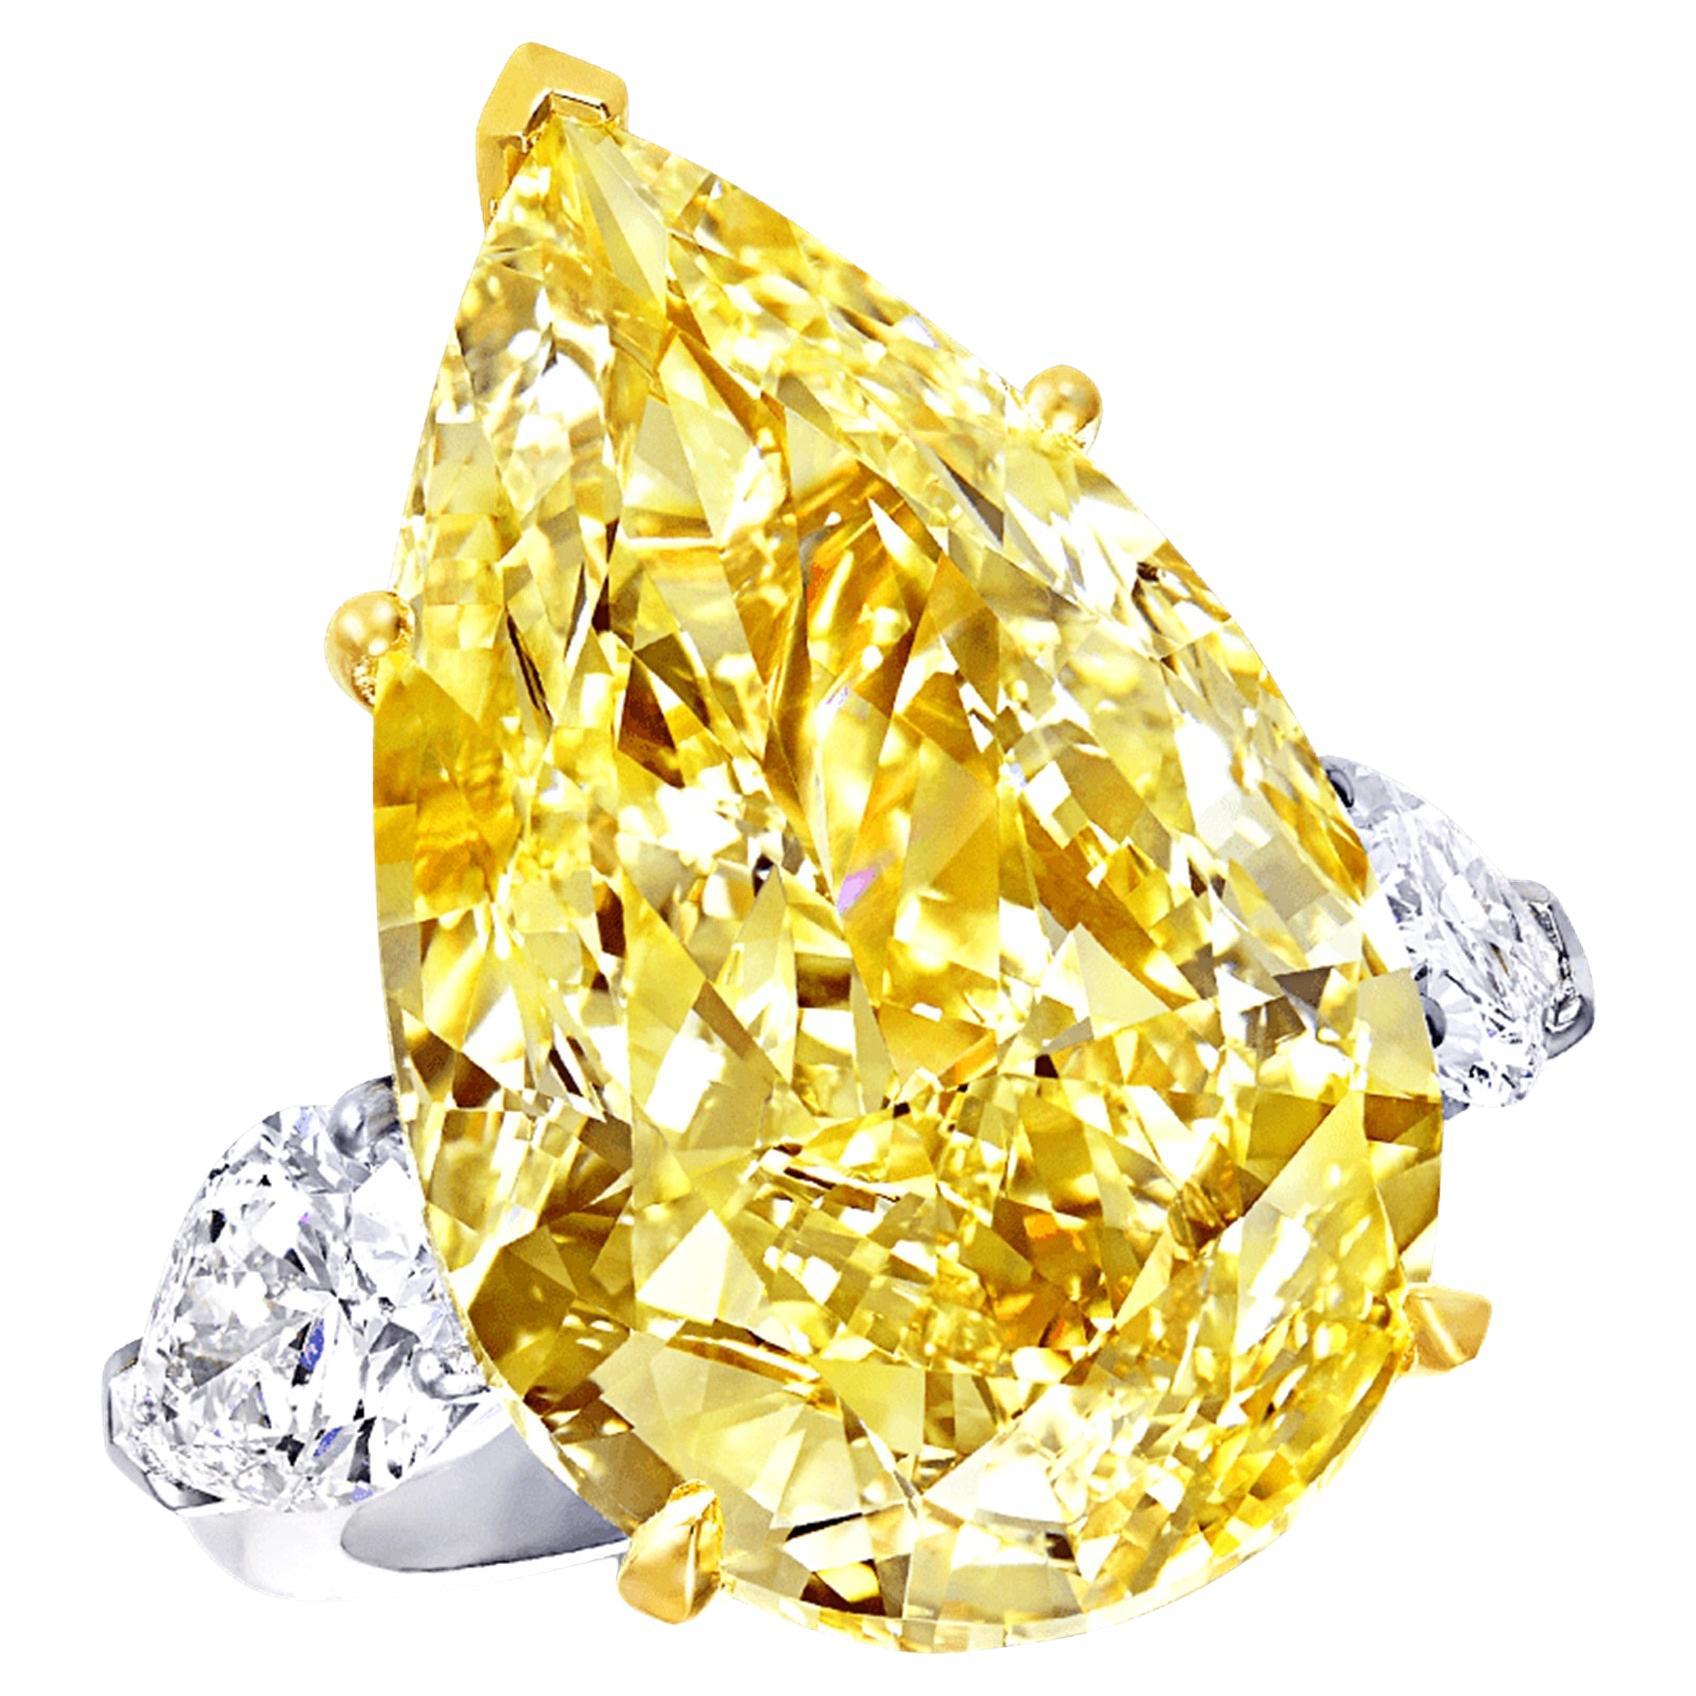 Introducing a breathtaking masterpiece of fine jewelry, this GIA Certified Fancy Intense Yellow 11.02 Carat Pear Shape Three Stone Diamond Ring is a symbol of exquisite luxury and unparalleled beauty. The centerpiece of this stunning ring is an